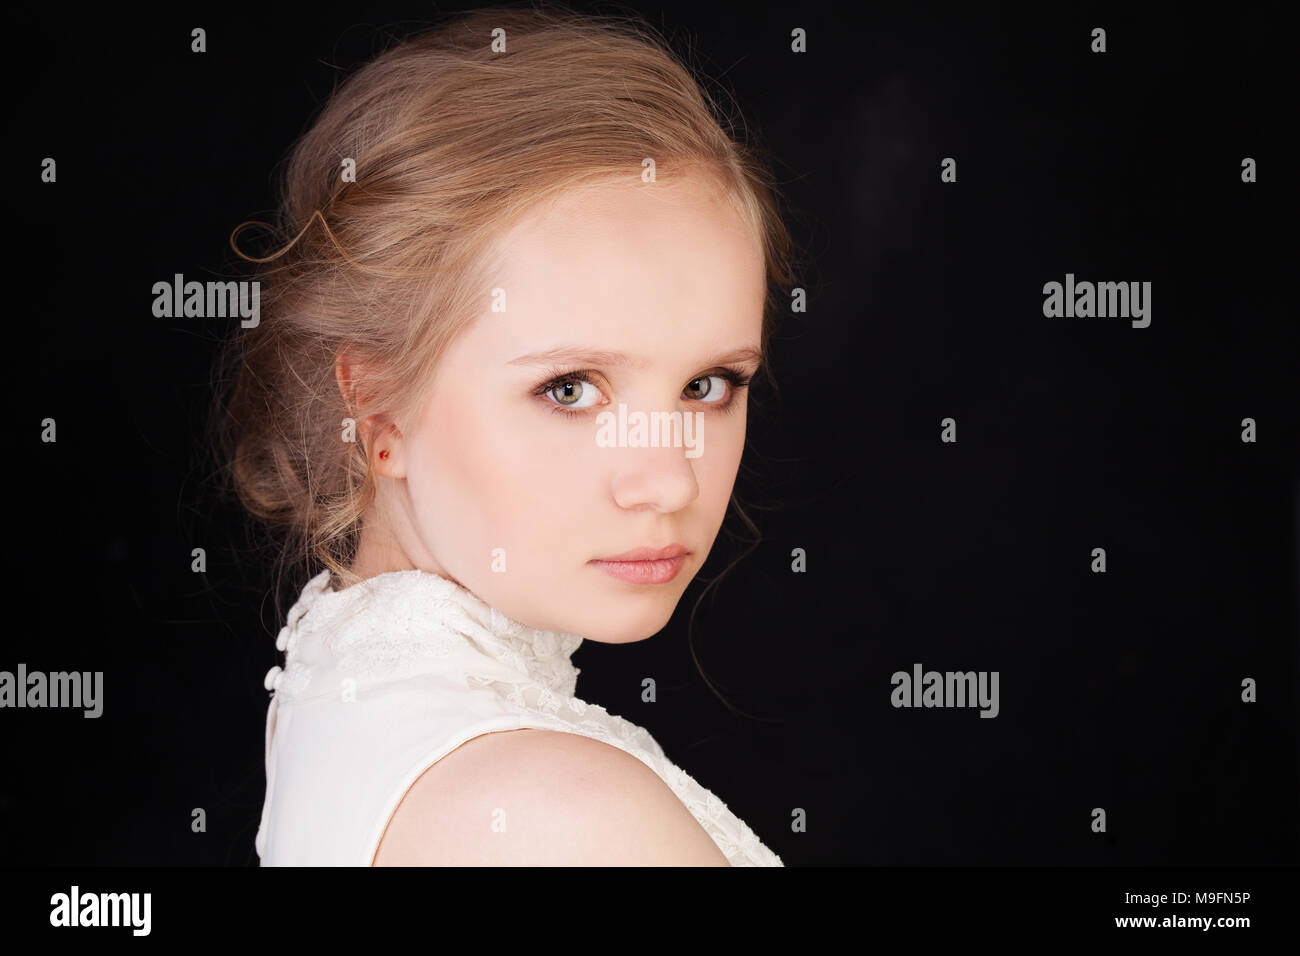 Young Face Cute Girl With Blonde Hair On Black Background Stock